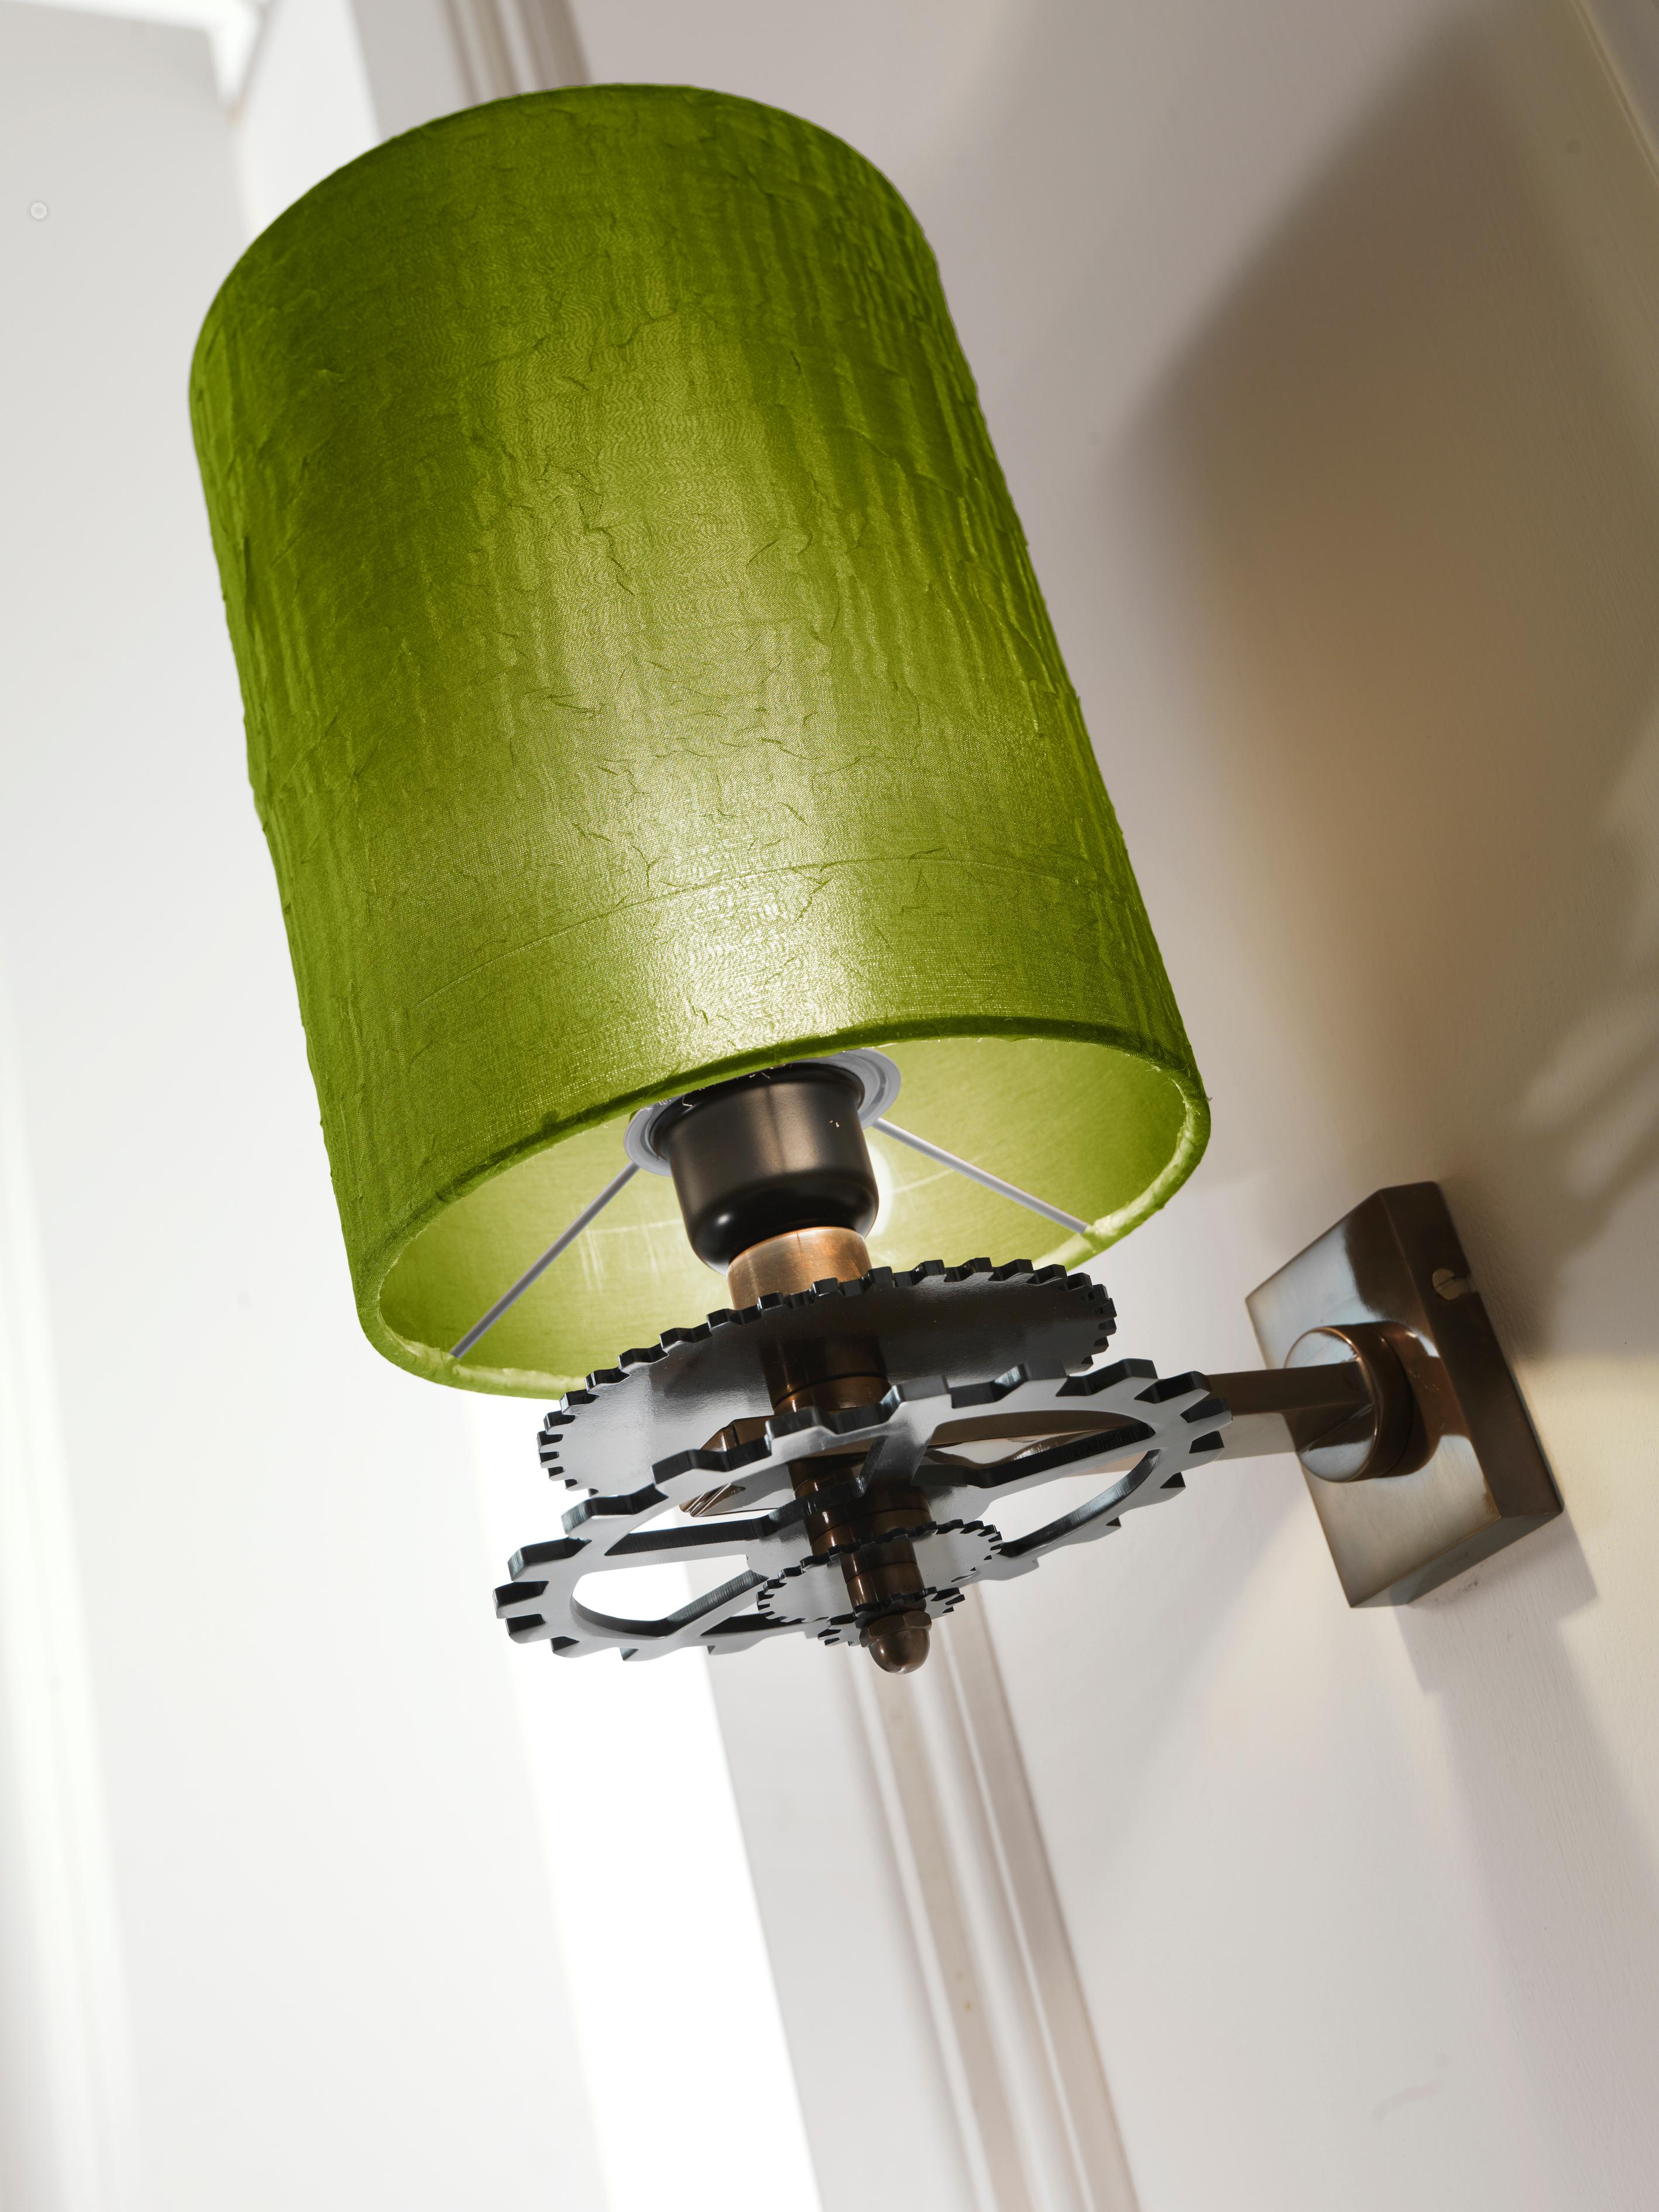 Burnished brass wall lamp with iron gear wheels in pewter finish. Green silk lampshade.